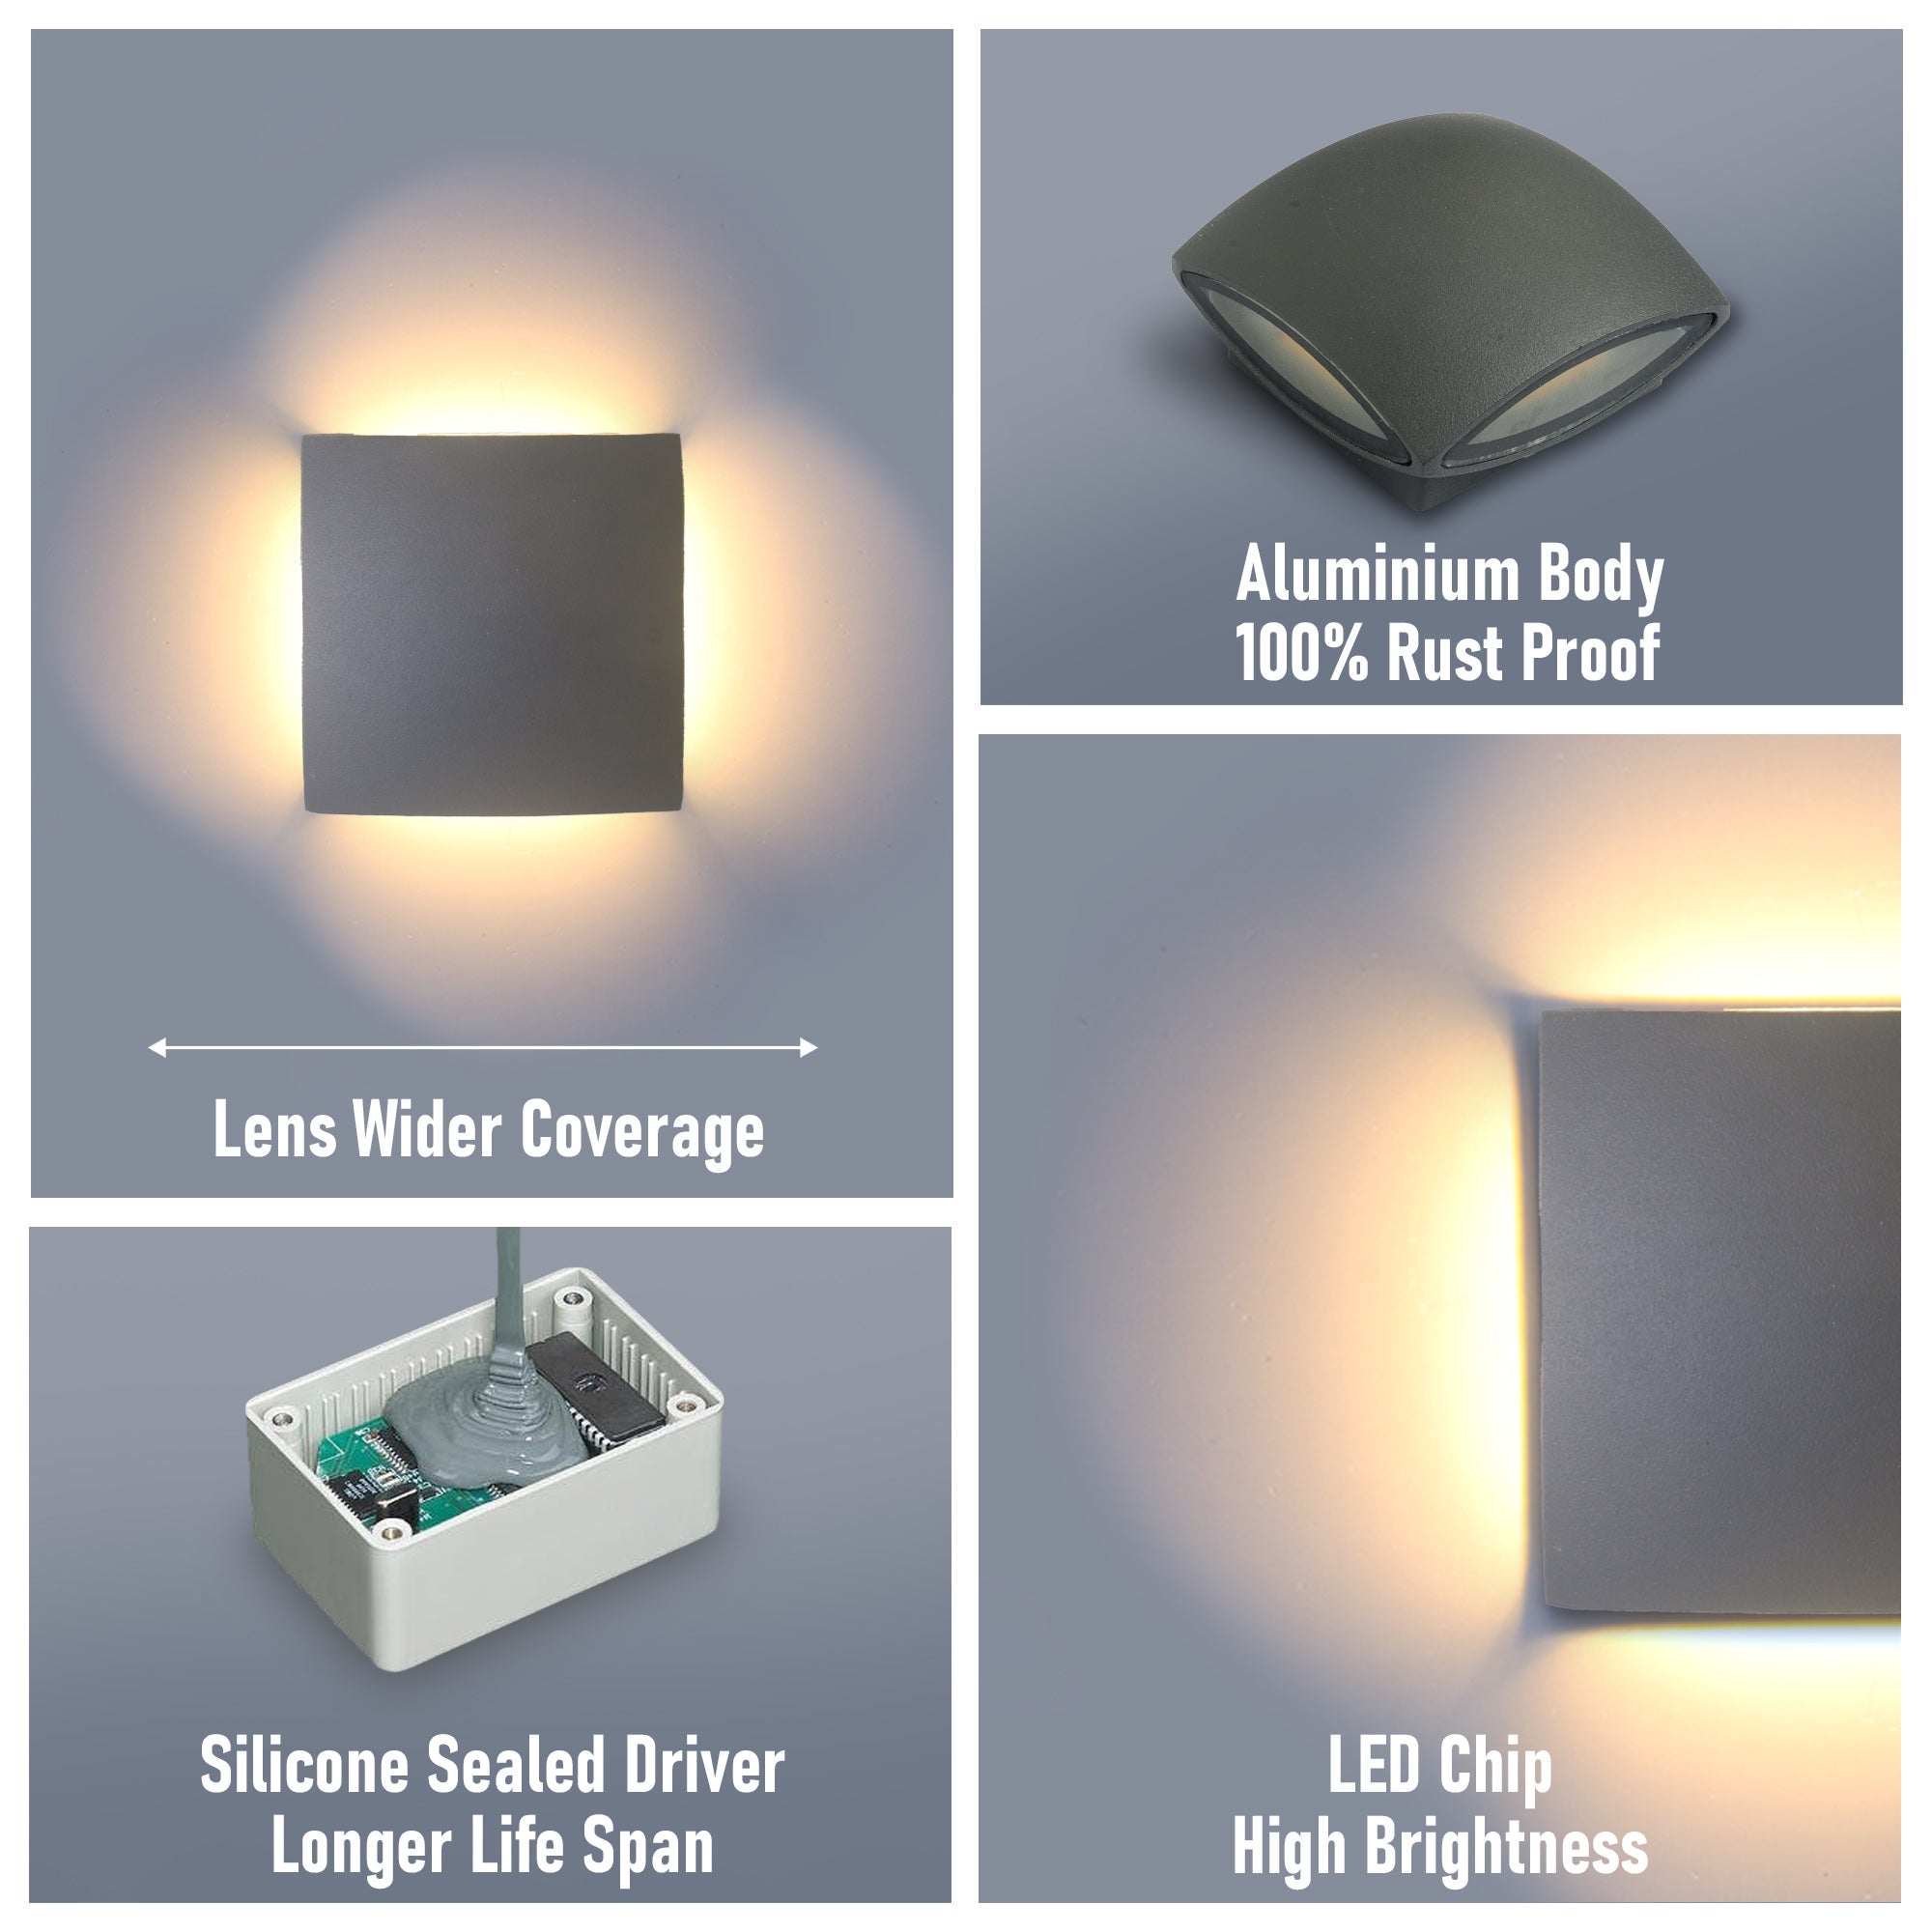 Specifications of Nini four way led wall light